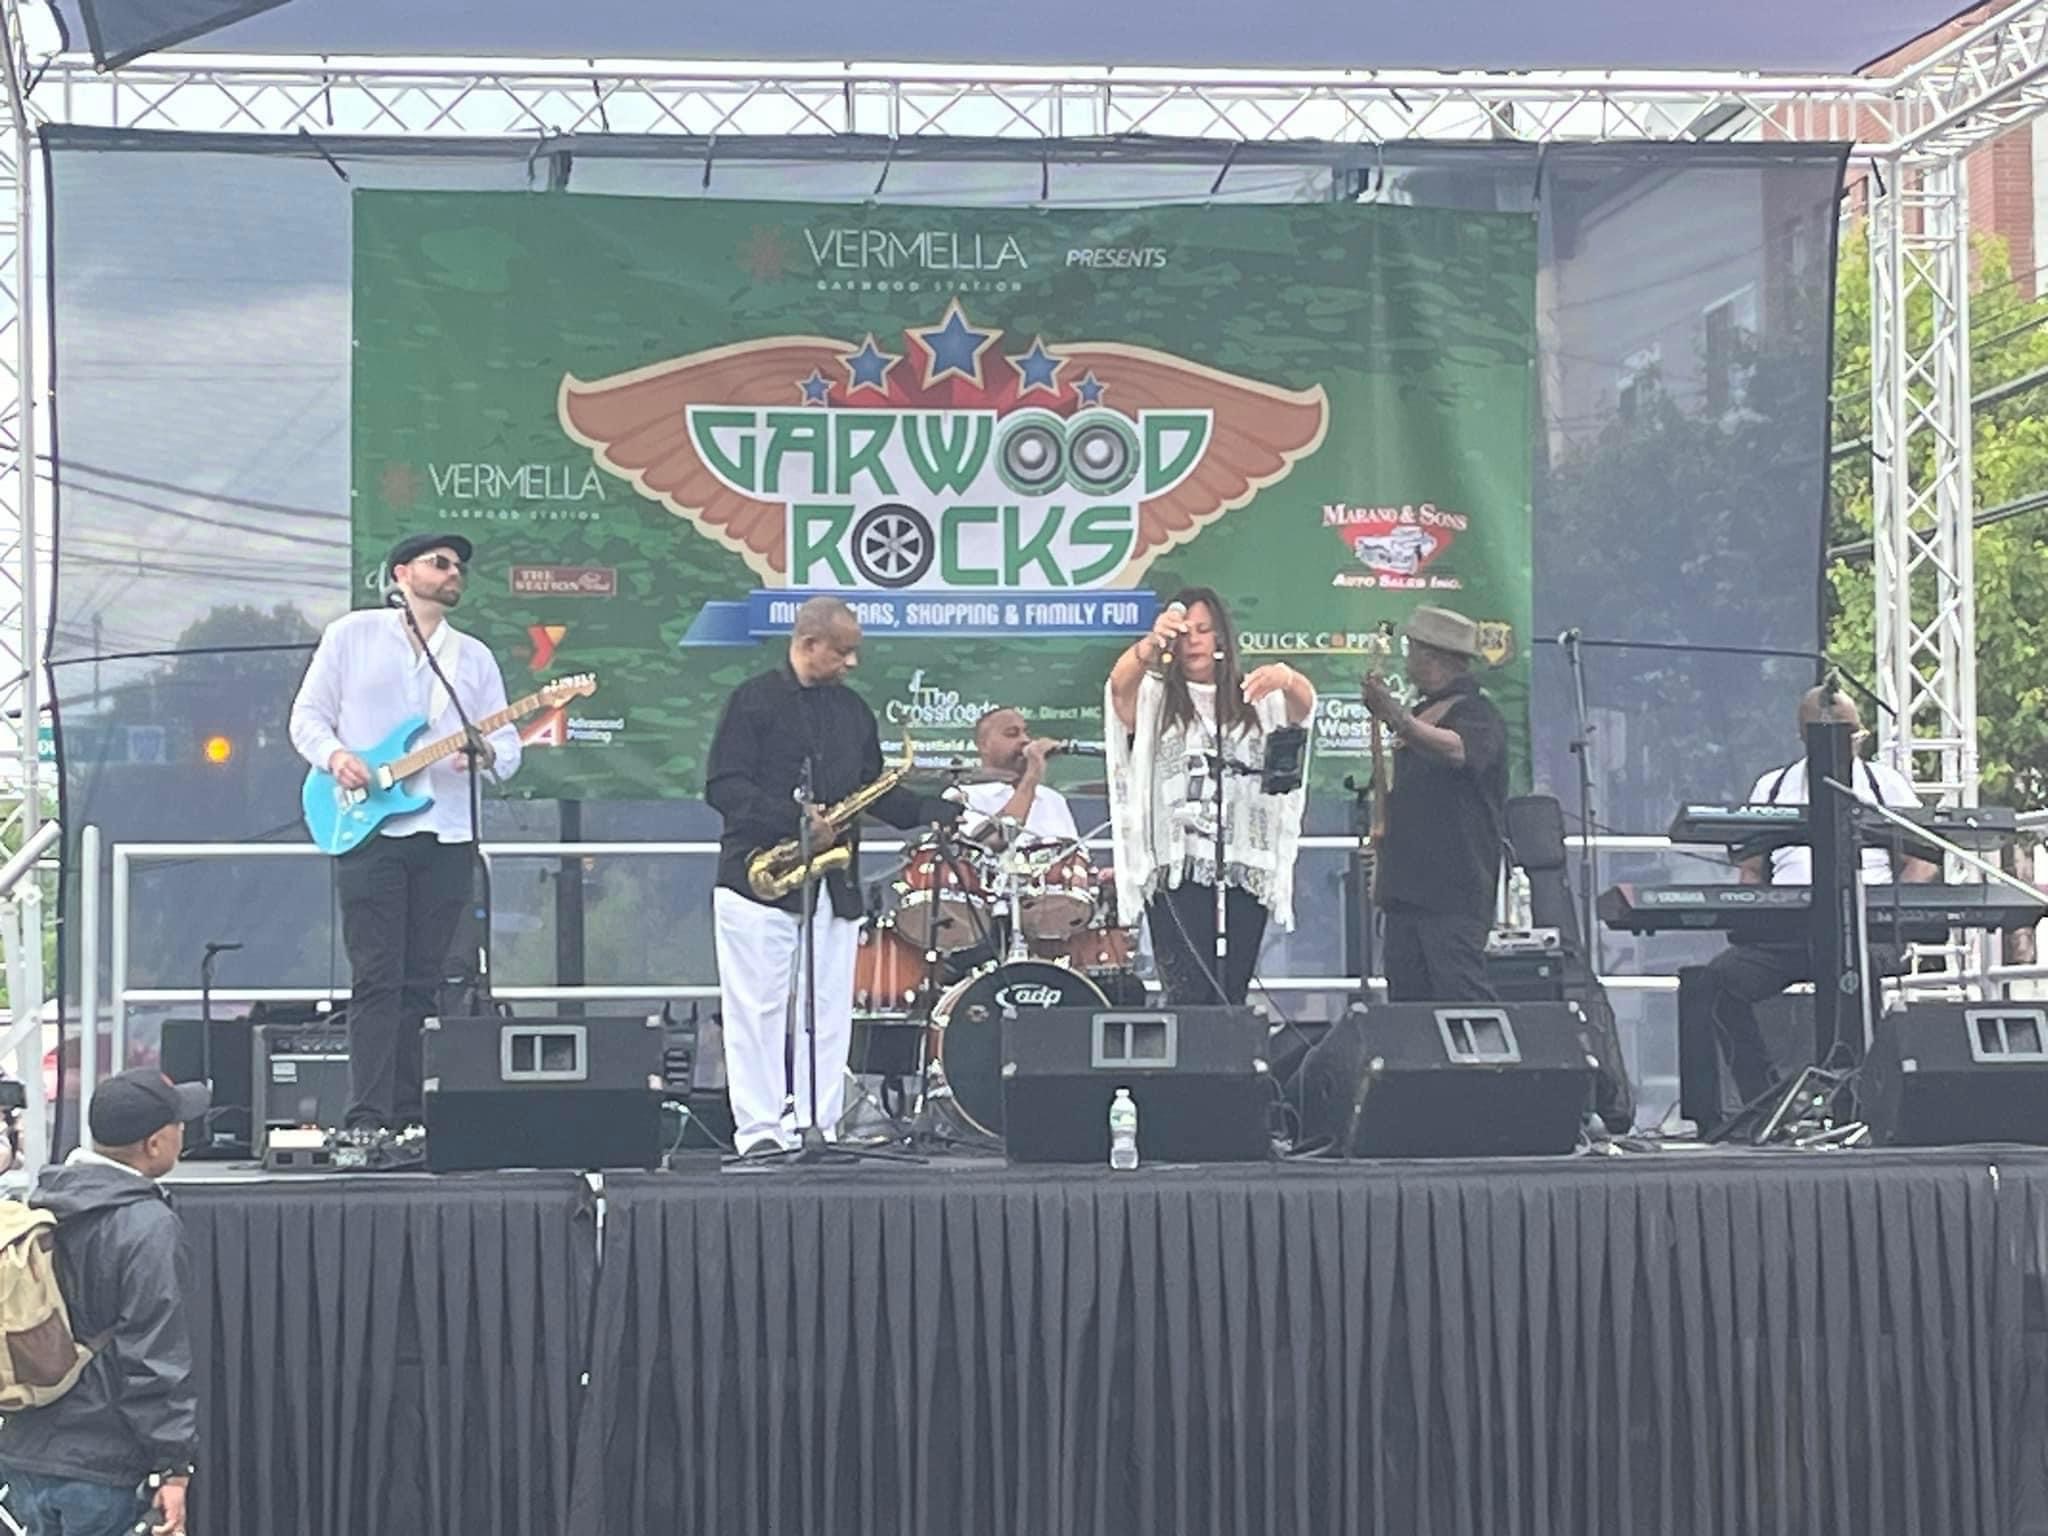 Renna Media Thanks to all who made Garwood Rocks possible